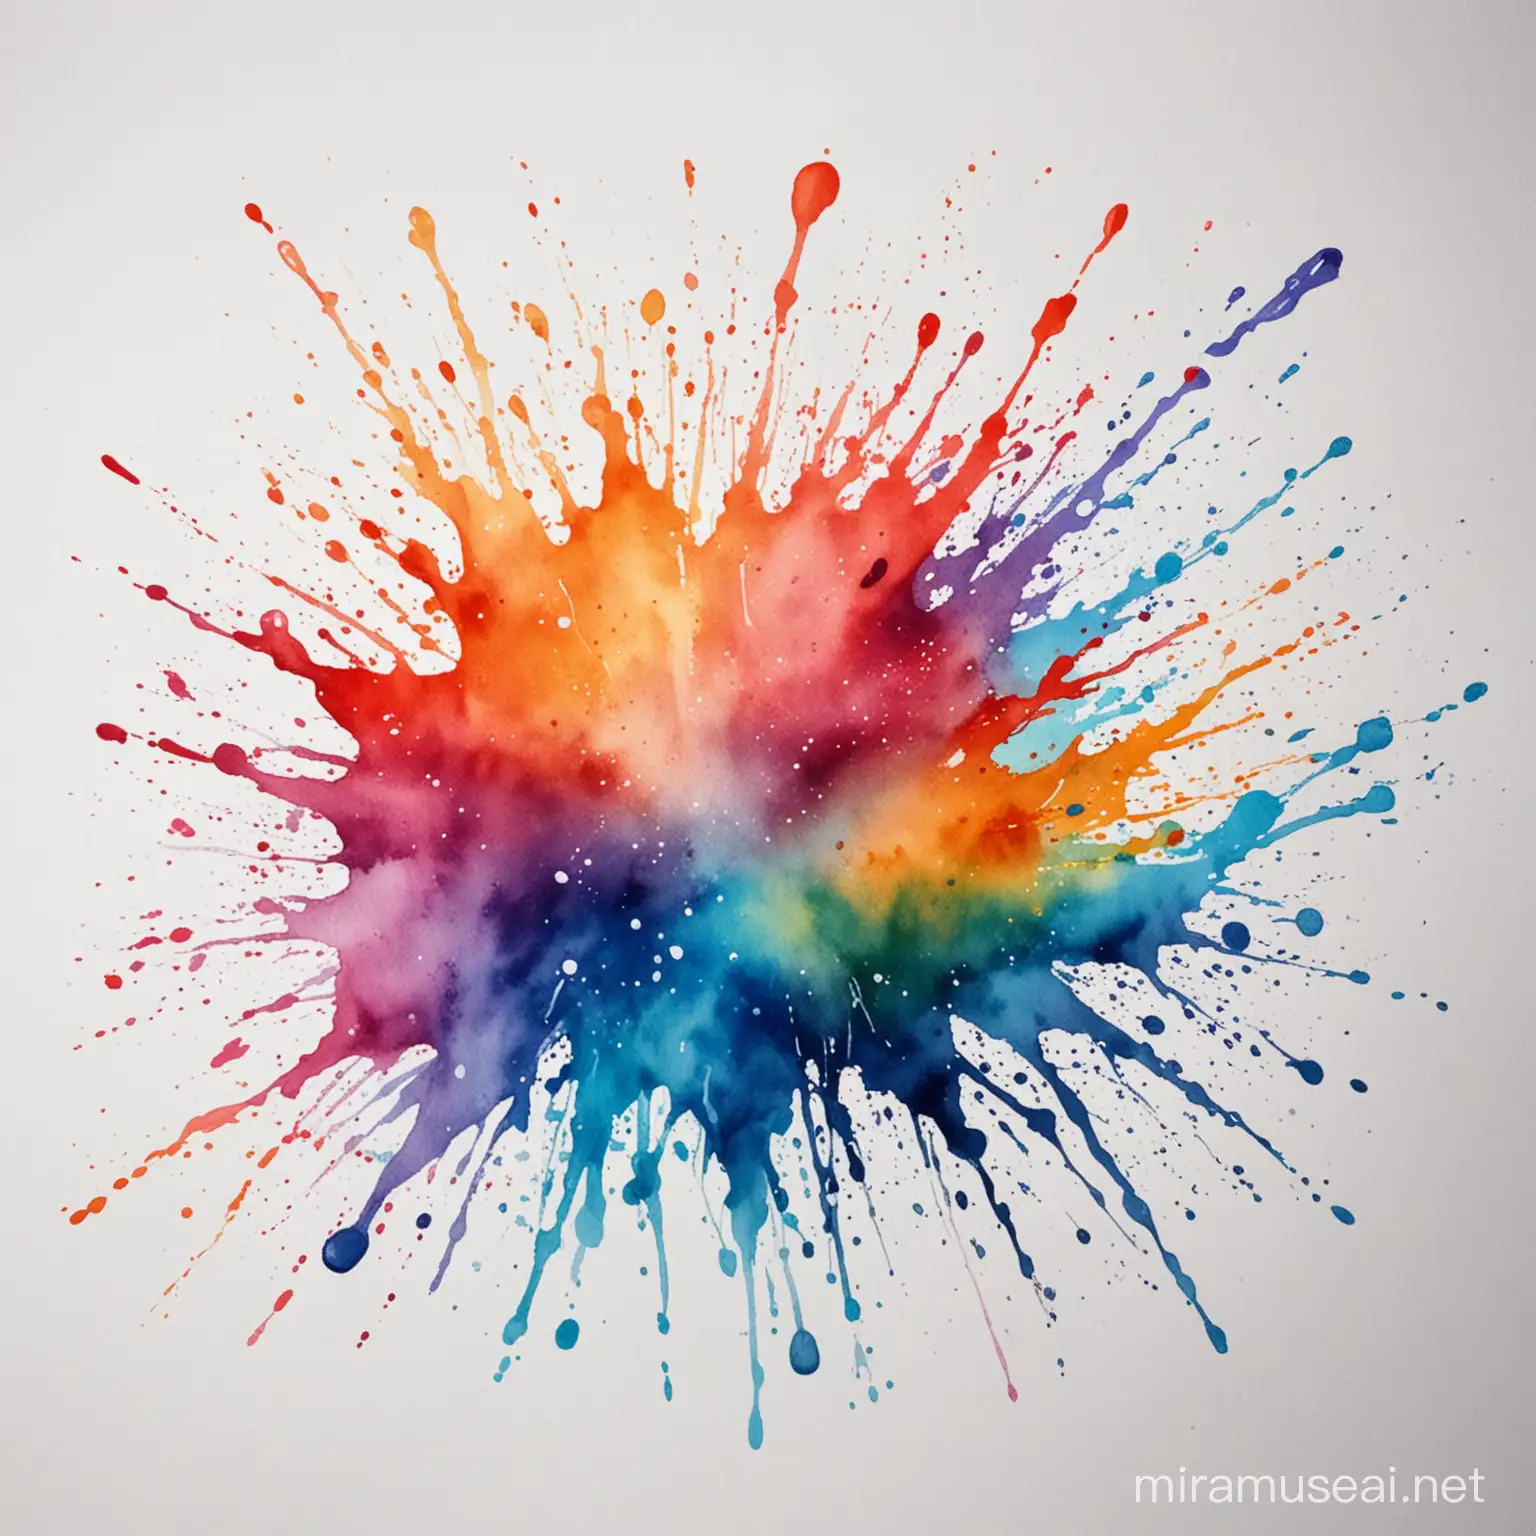 Vibrant Watercolor Painting Splashes Abstract Artwork with Colorful Blotches